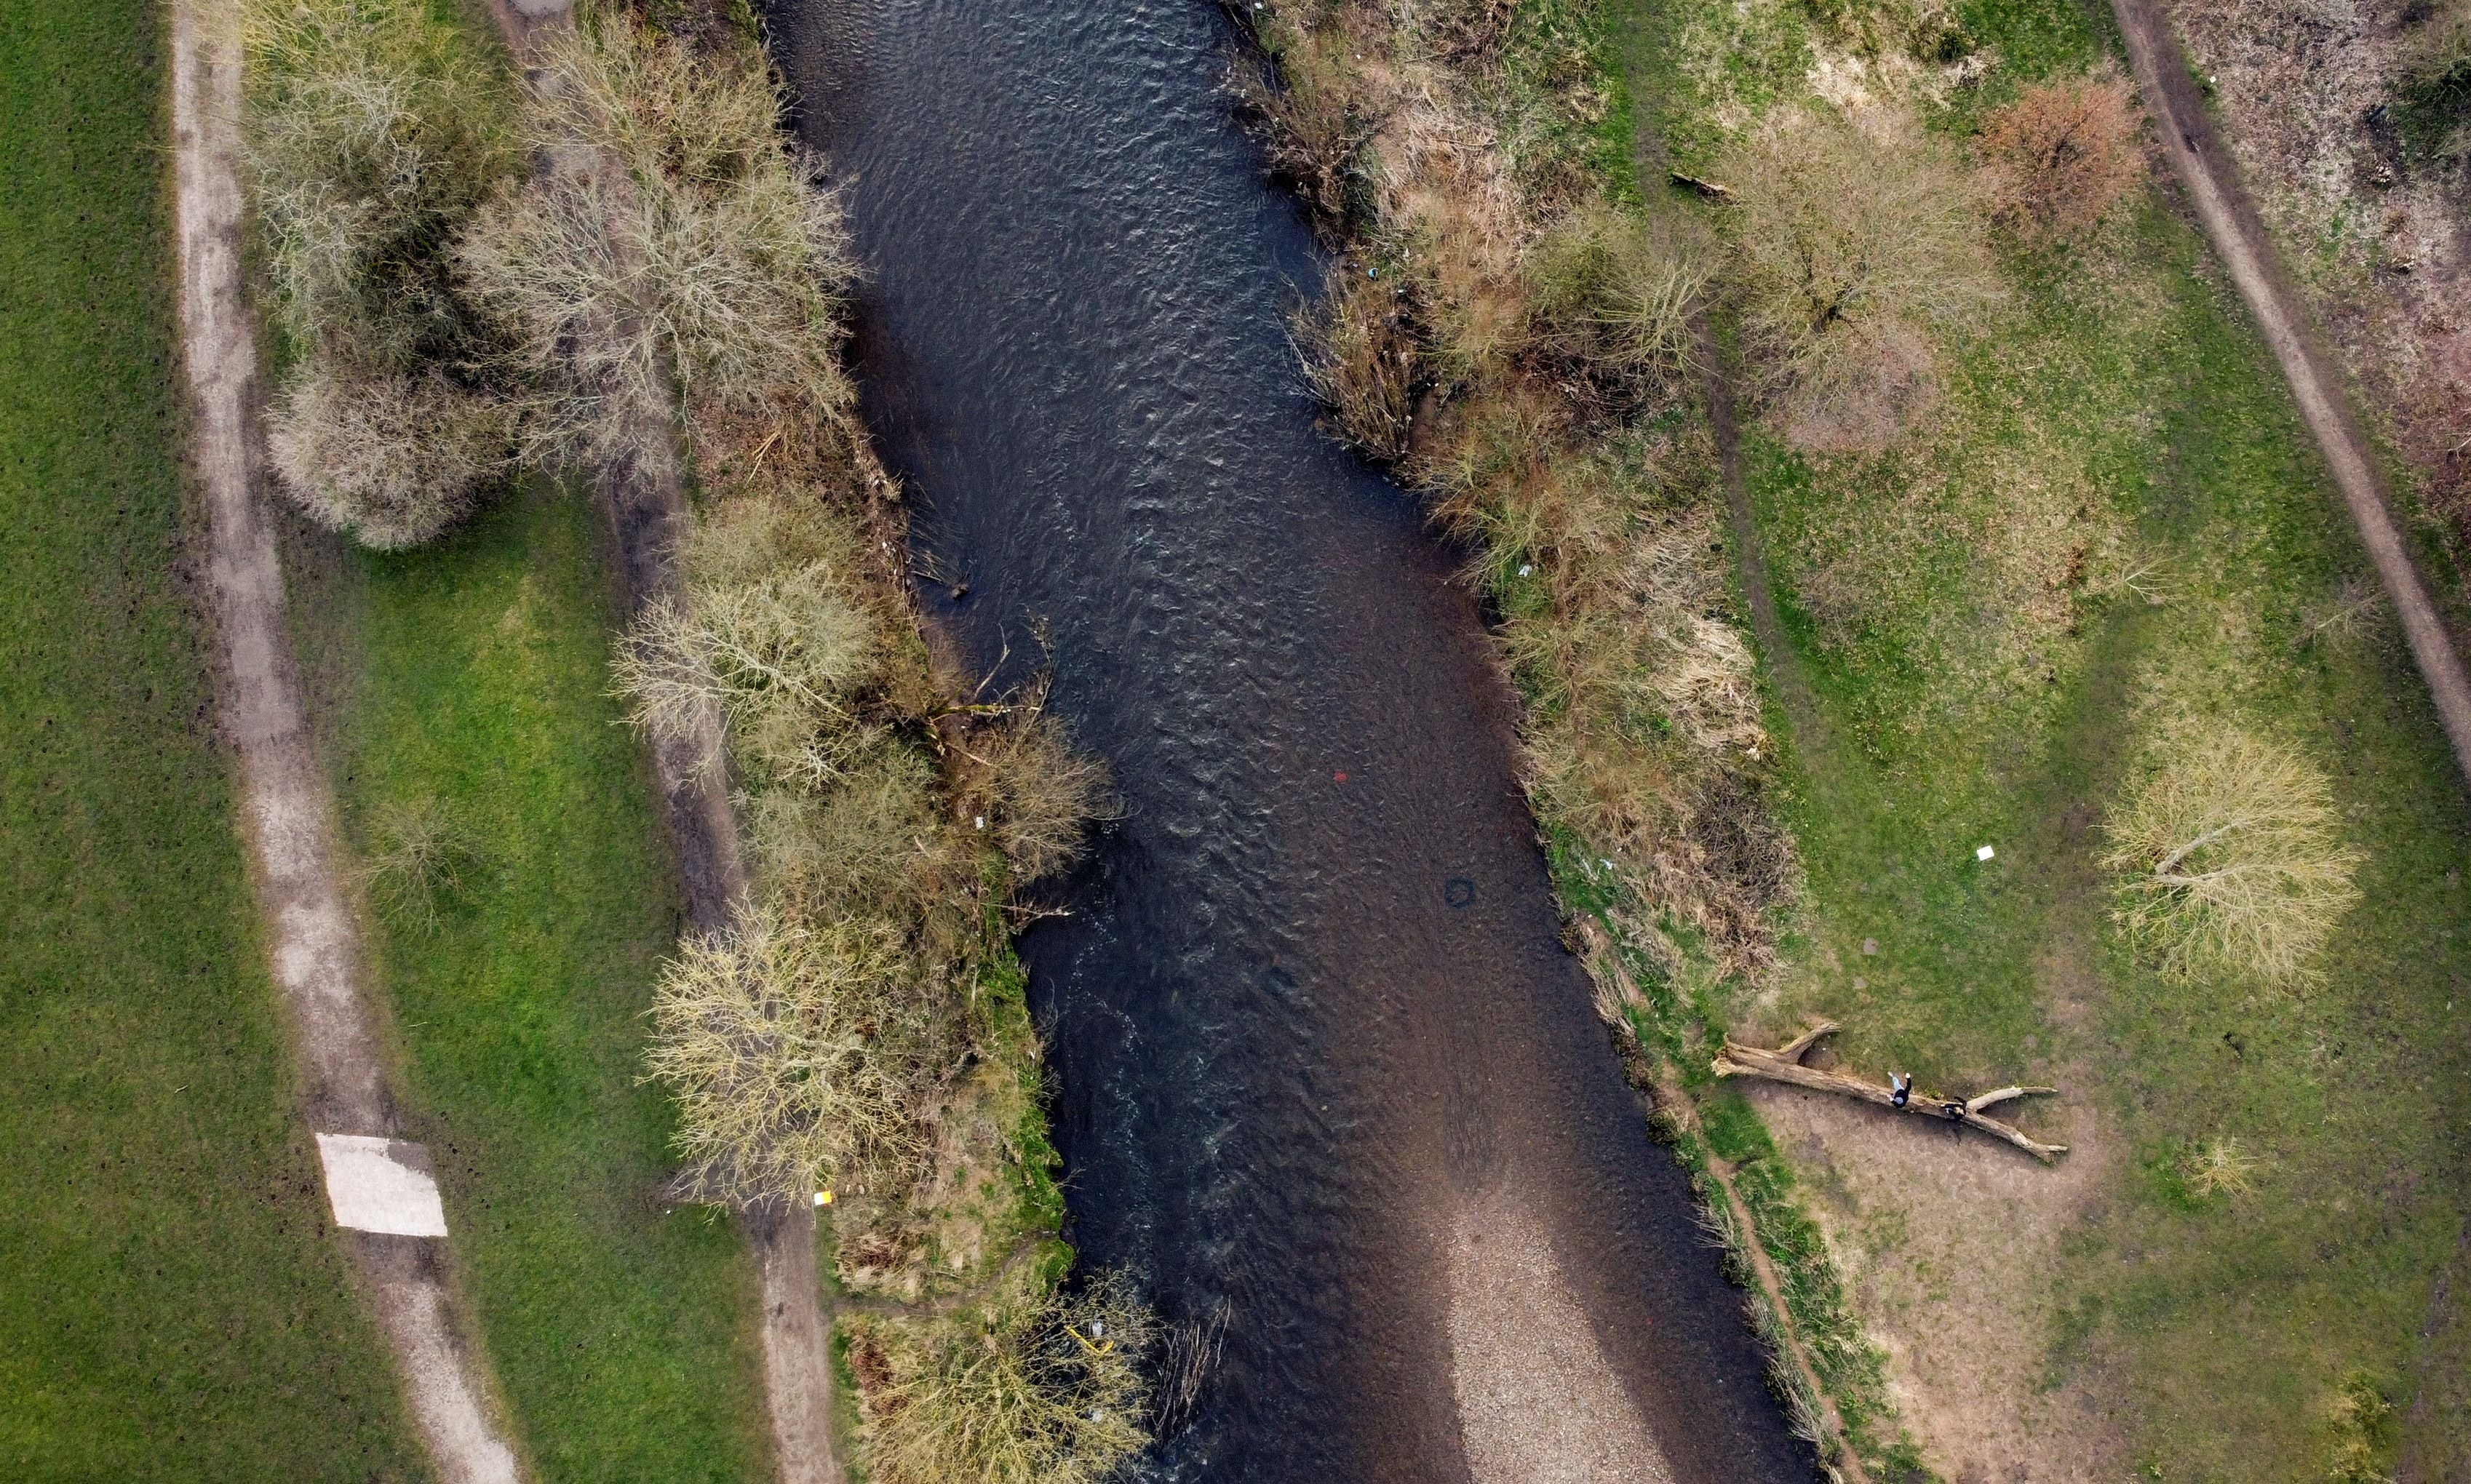 A University of Manchester report in 2018 found that the River Tame near Denton had 'the worst' level of microplastic pollution ever recorded anywhere in the world at that time